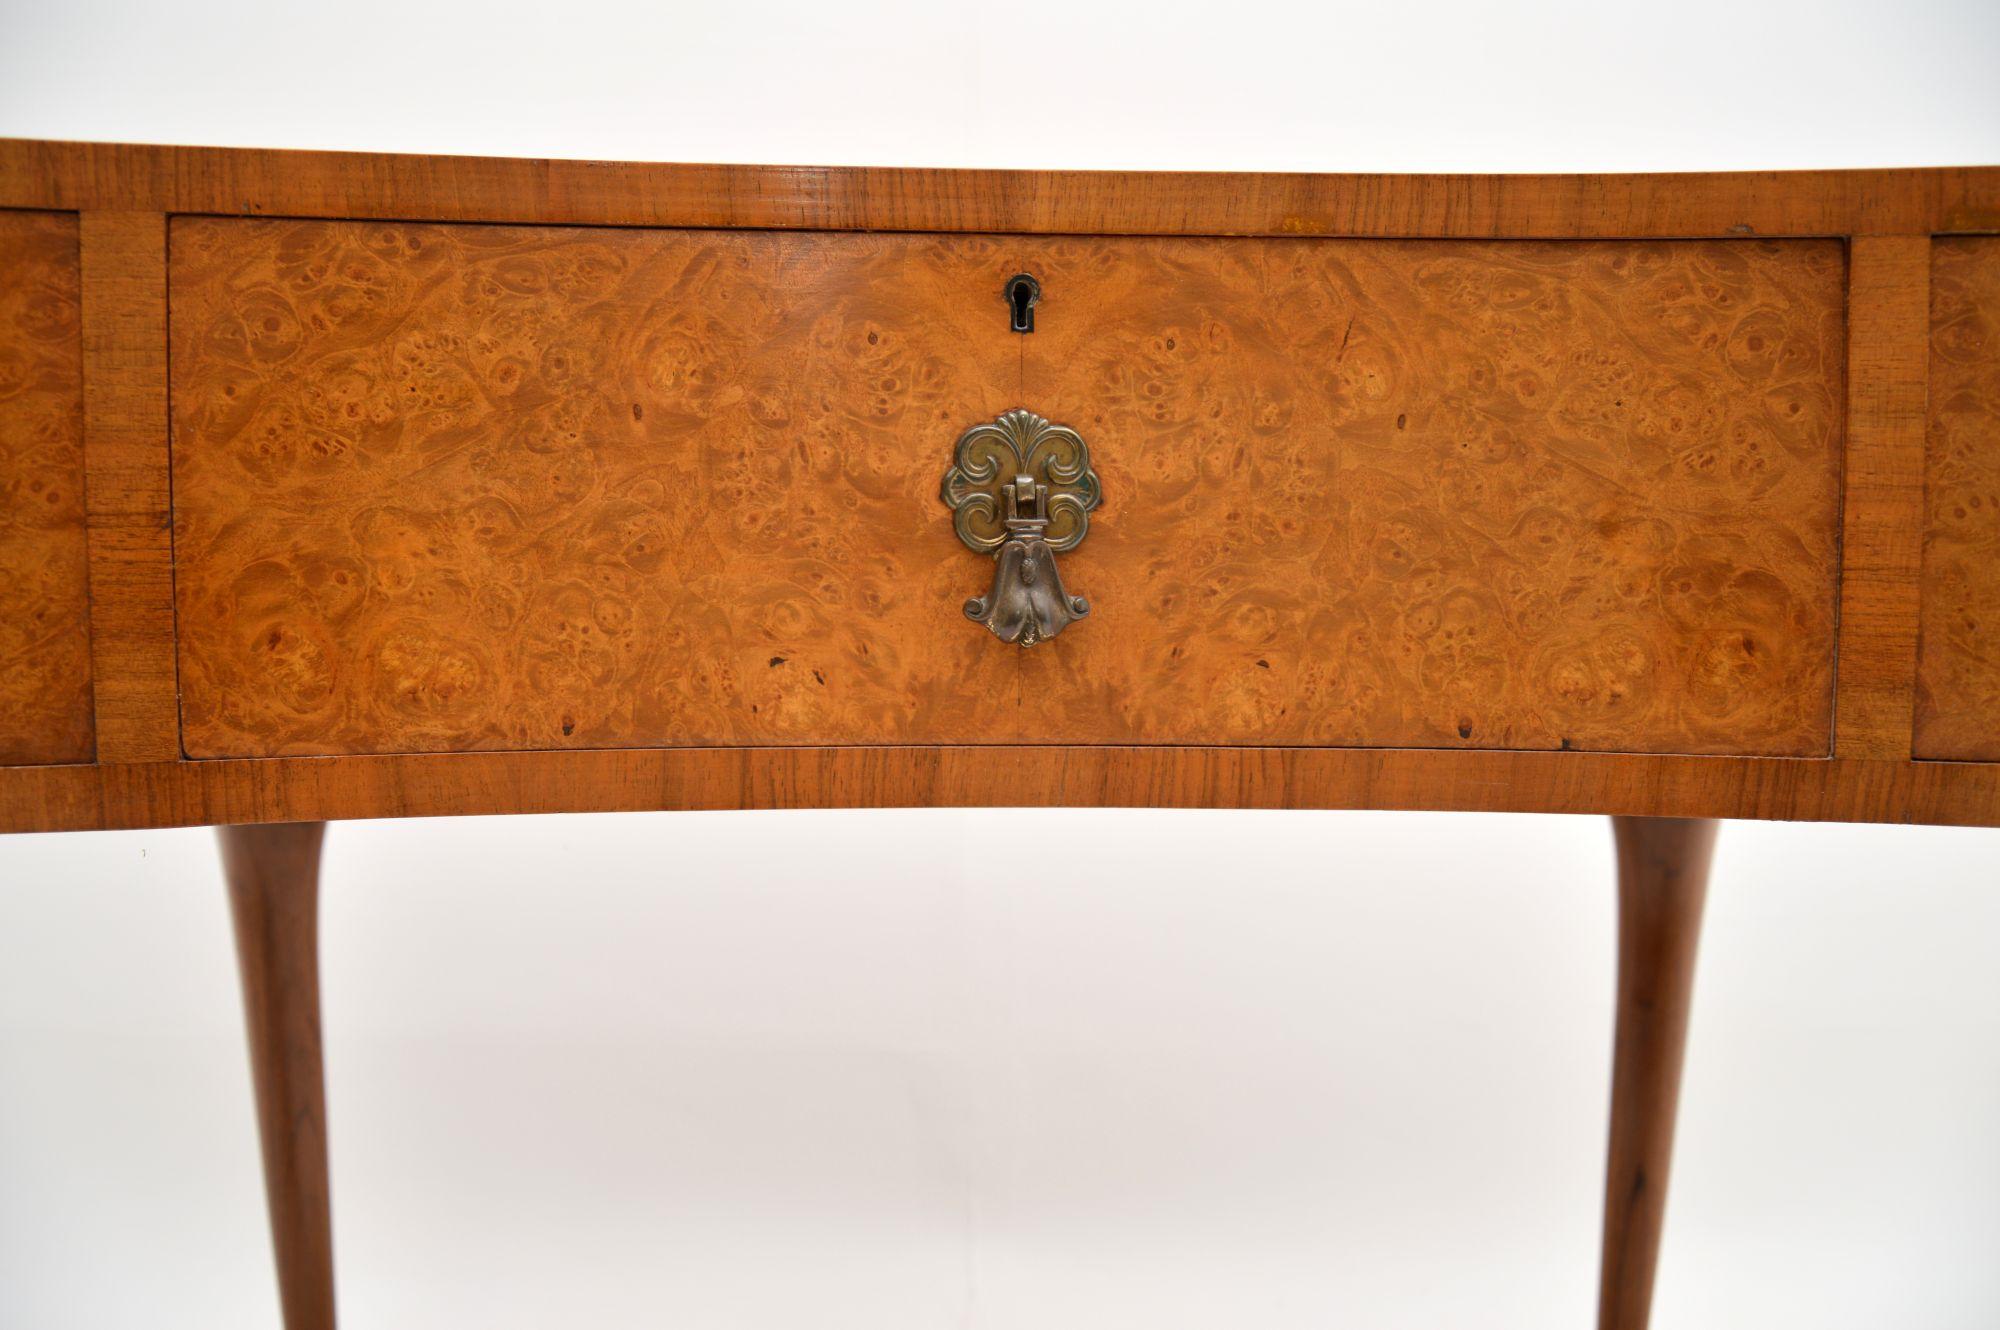 Queen Anne Antique Burr Walnut Kidney Shaped Desk or Dressing Table by Waring & Gillows